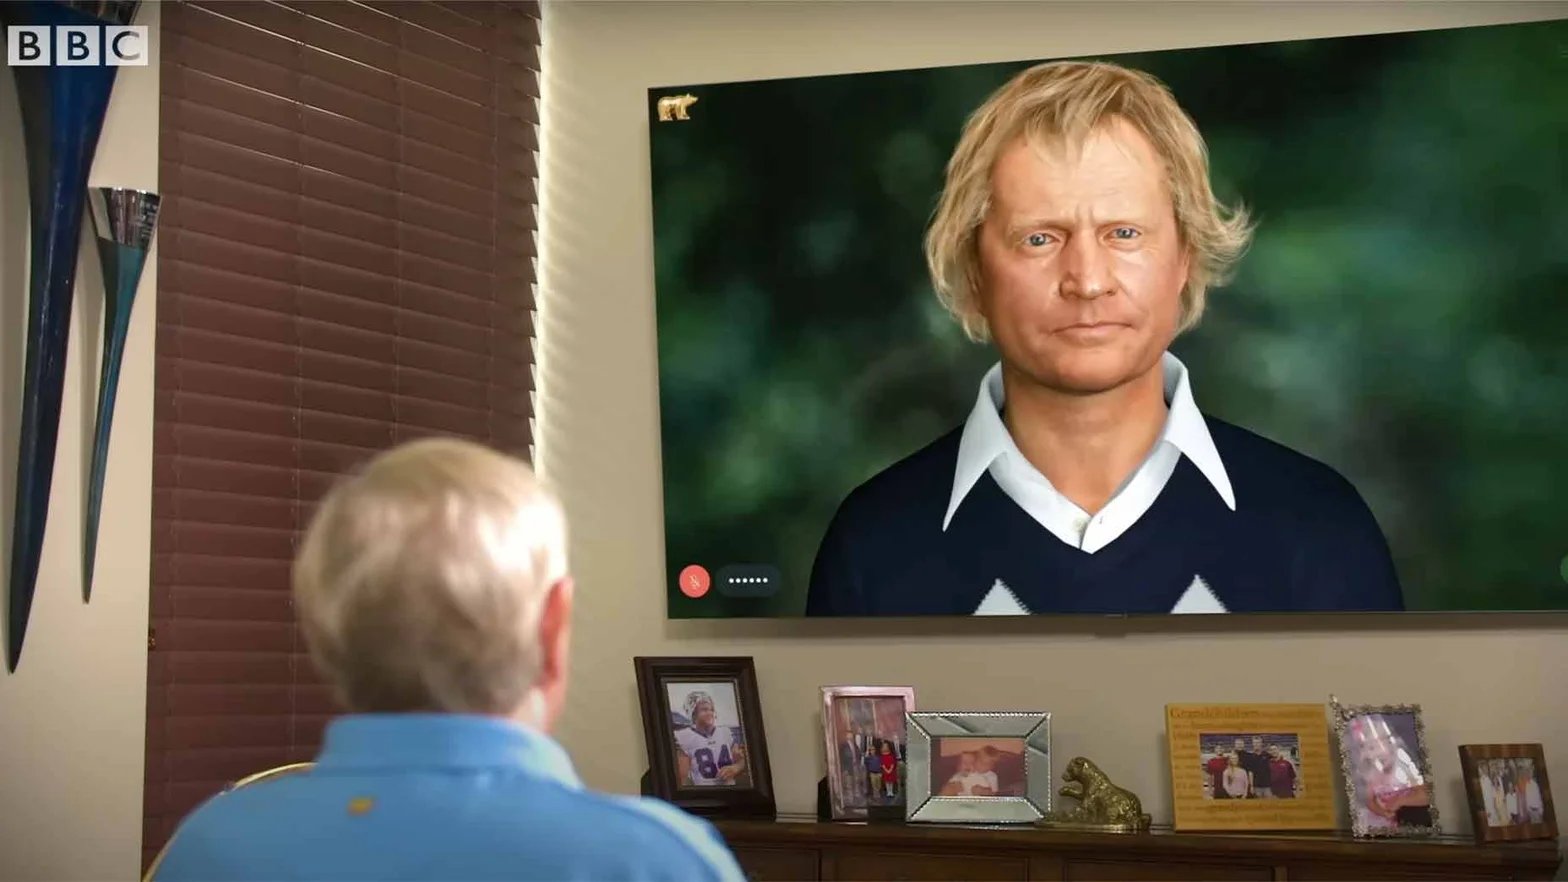 Soul Machines' AI-powered Jack Nicklaus will help Nicklaus' legacy live on.